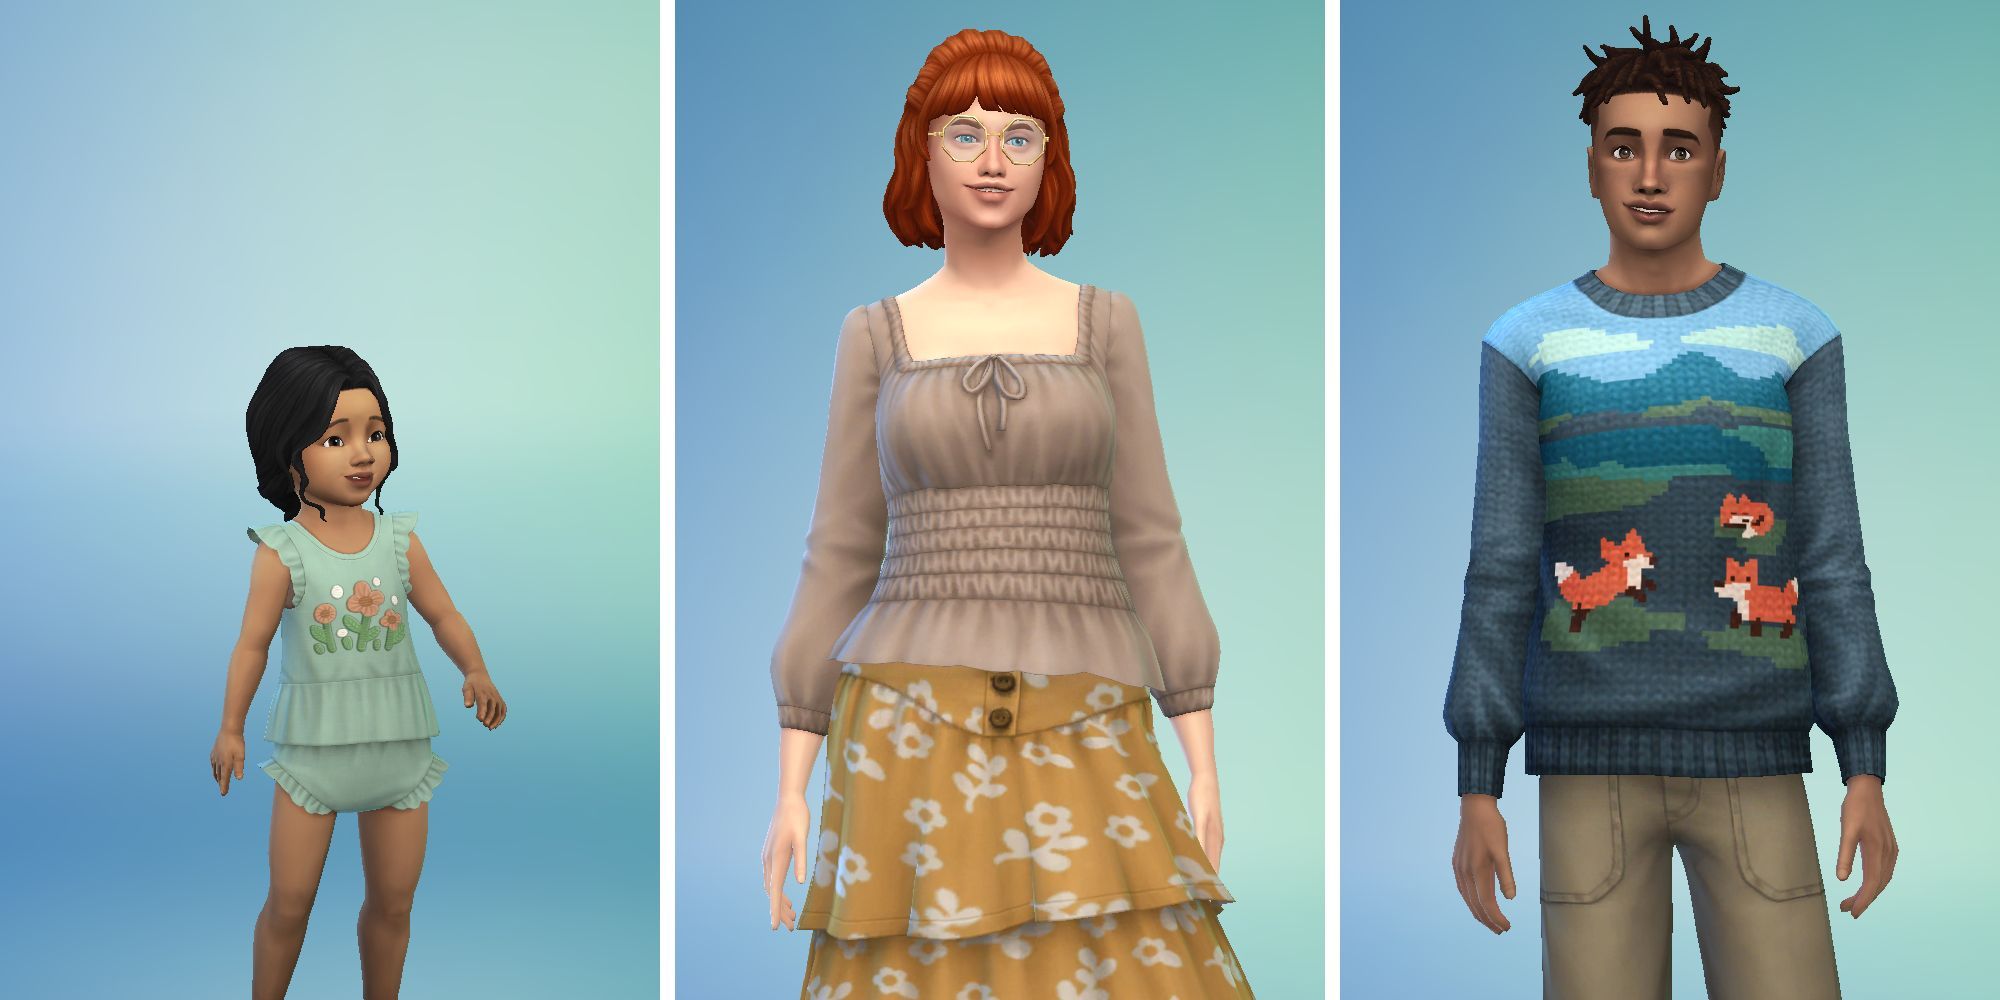 Three images of Sims from Sims 4 in Create A Sim. A toddler in a green onesie, an adult Sim in a tan shirt and yellow skirt, and a third in sweater with foxes on it